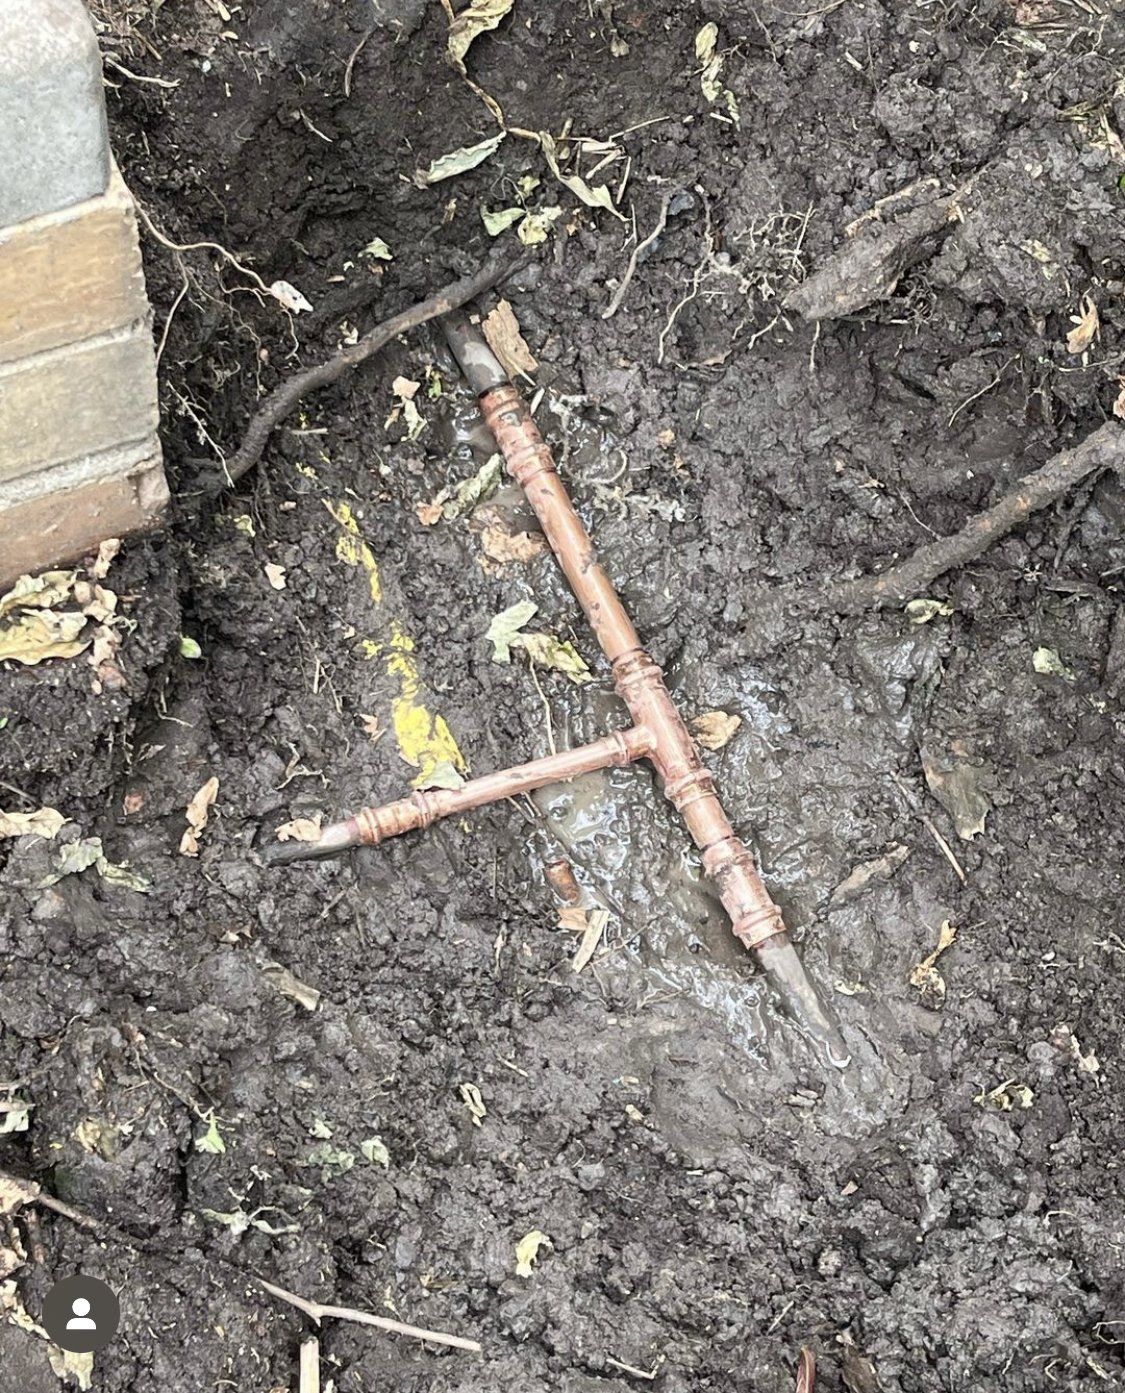 Image depicts a mudded area near the corner of a house with an exposed copper T junction pipe that has been repaired and is the post image of the burst pipe on the left side of the page.